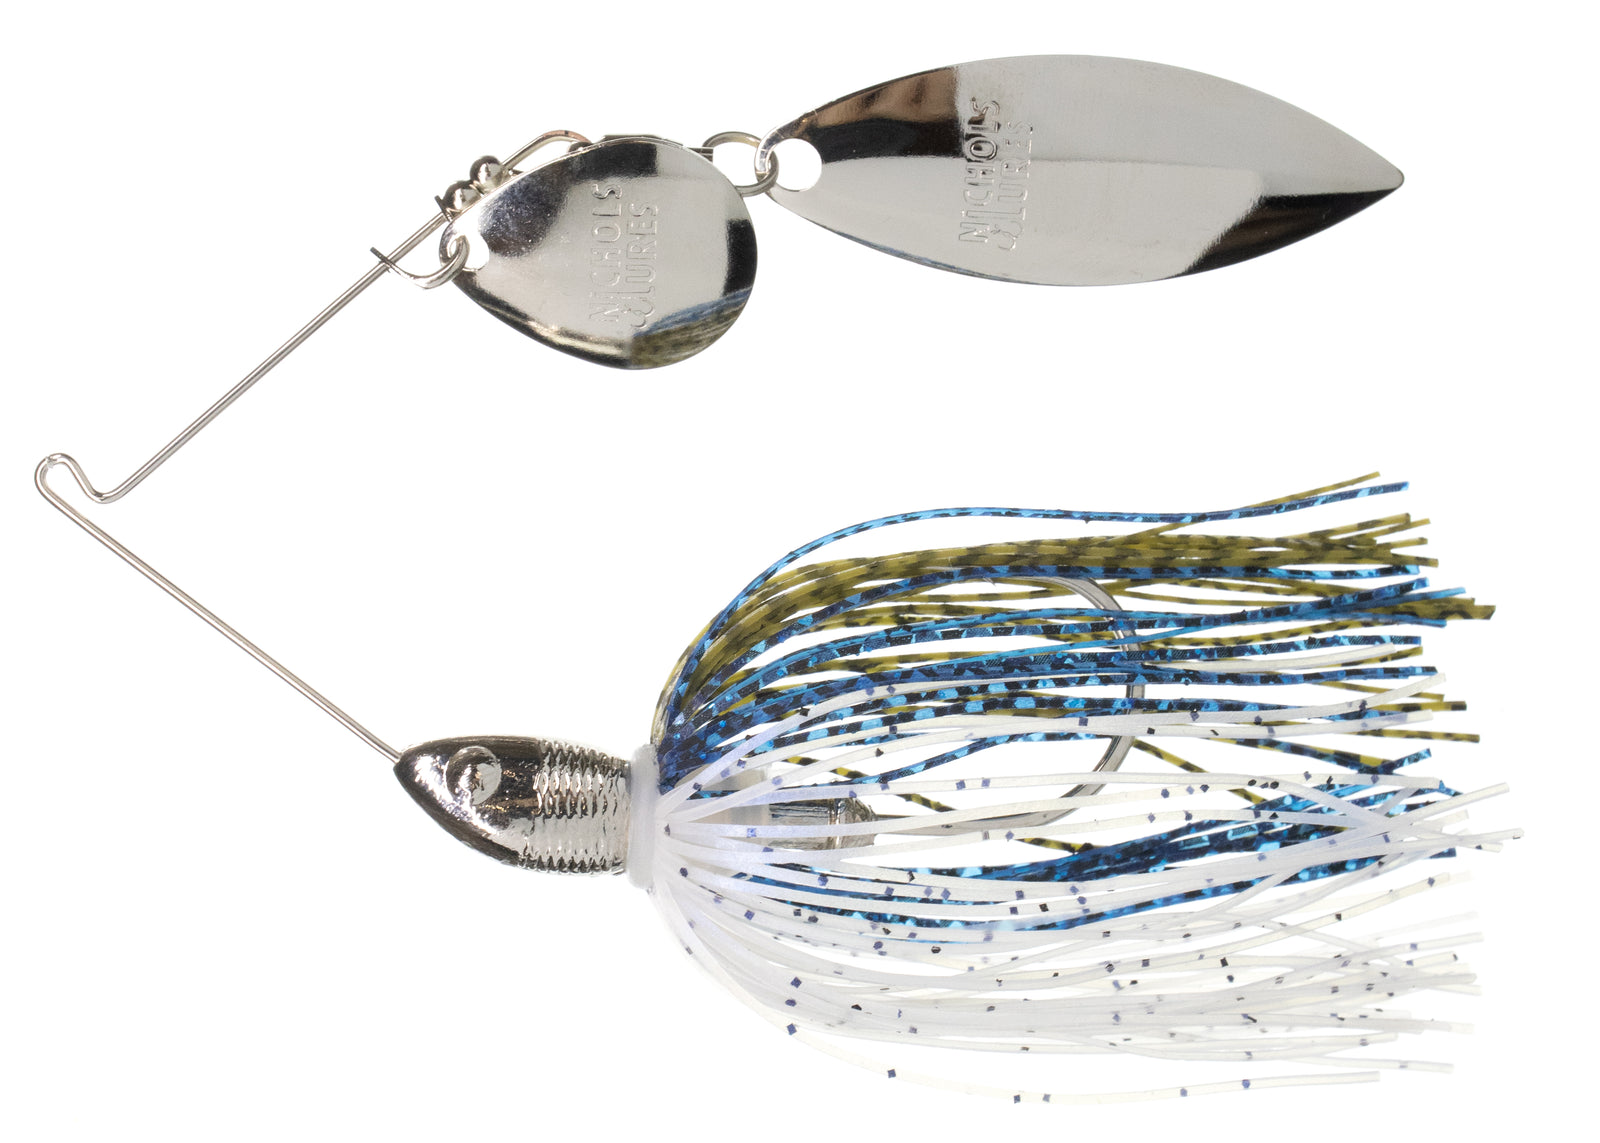 Shop All Lures - Nichols Lures